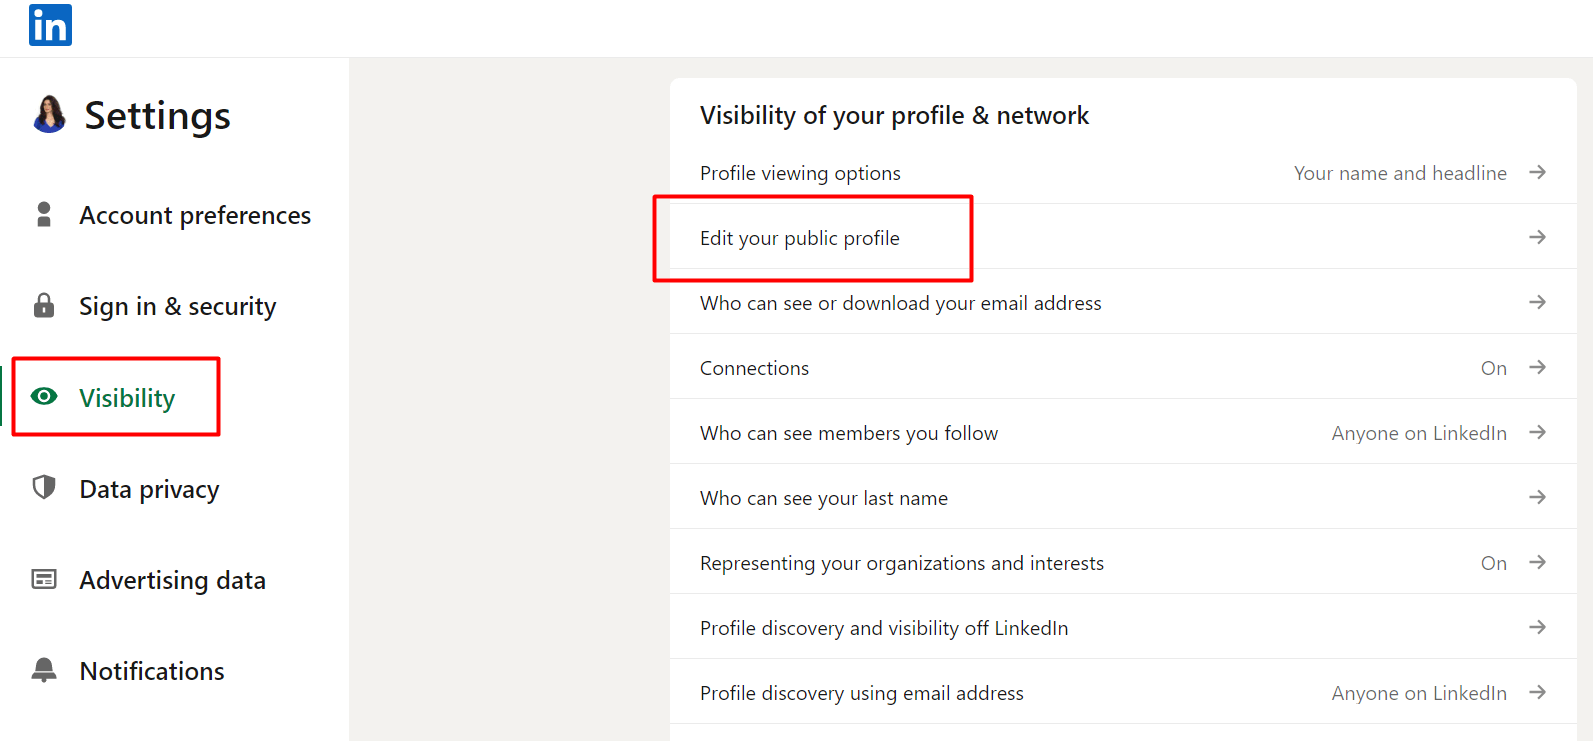 How to switch your LinkedIn profile to 'private profile status', Settings - Visibility - Edit public profile